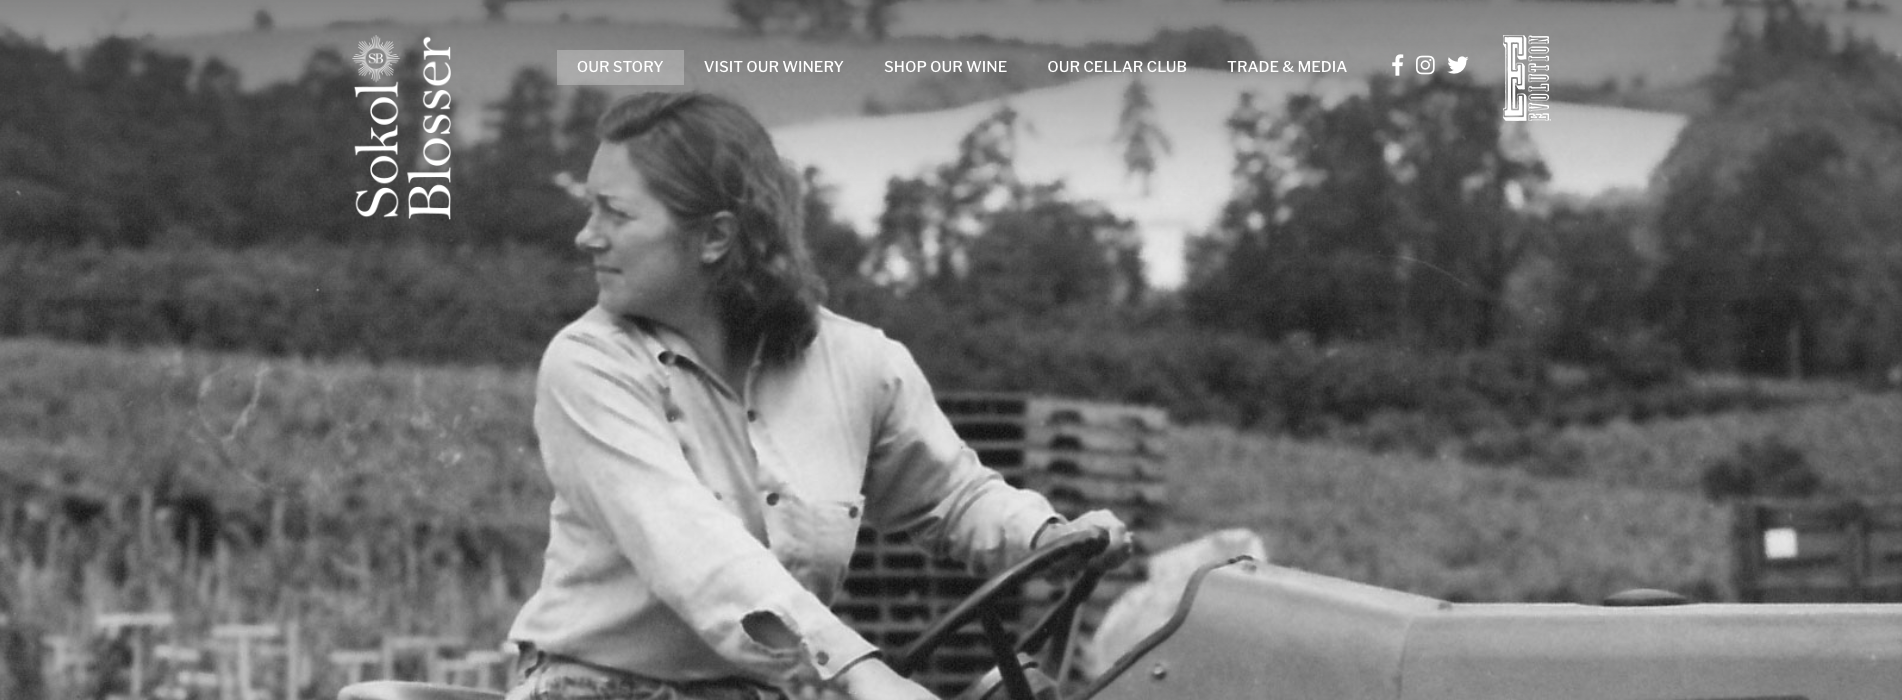 Susan Sokol Blosser on a tractor, a header image from the Sokol Blosser site